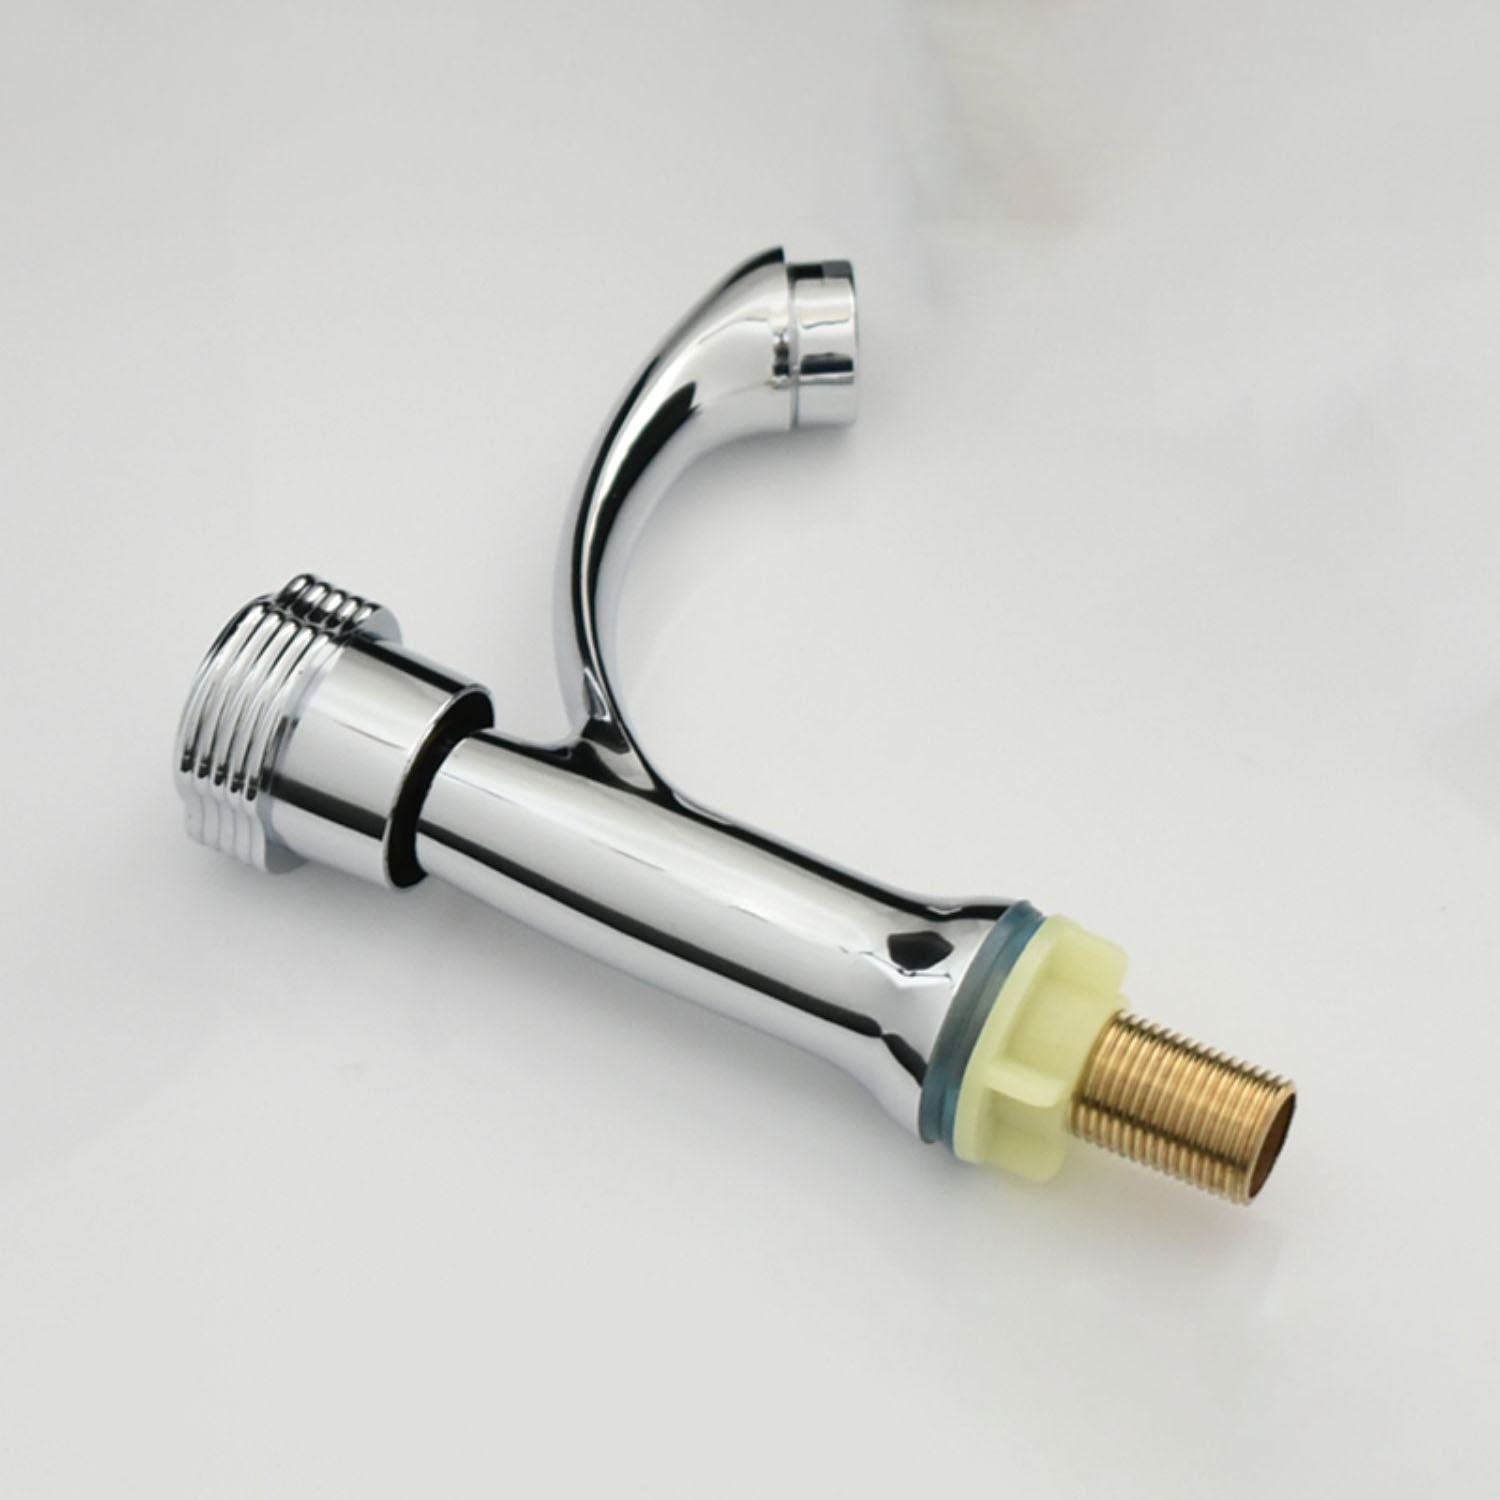 Modern Bathroom Faucet Chrome Knob Handle with Water Hose Vessel Sink Faucet